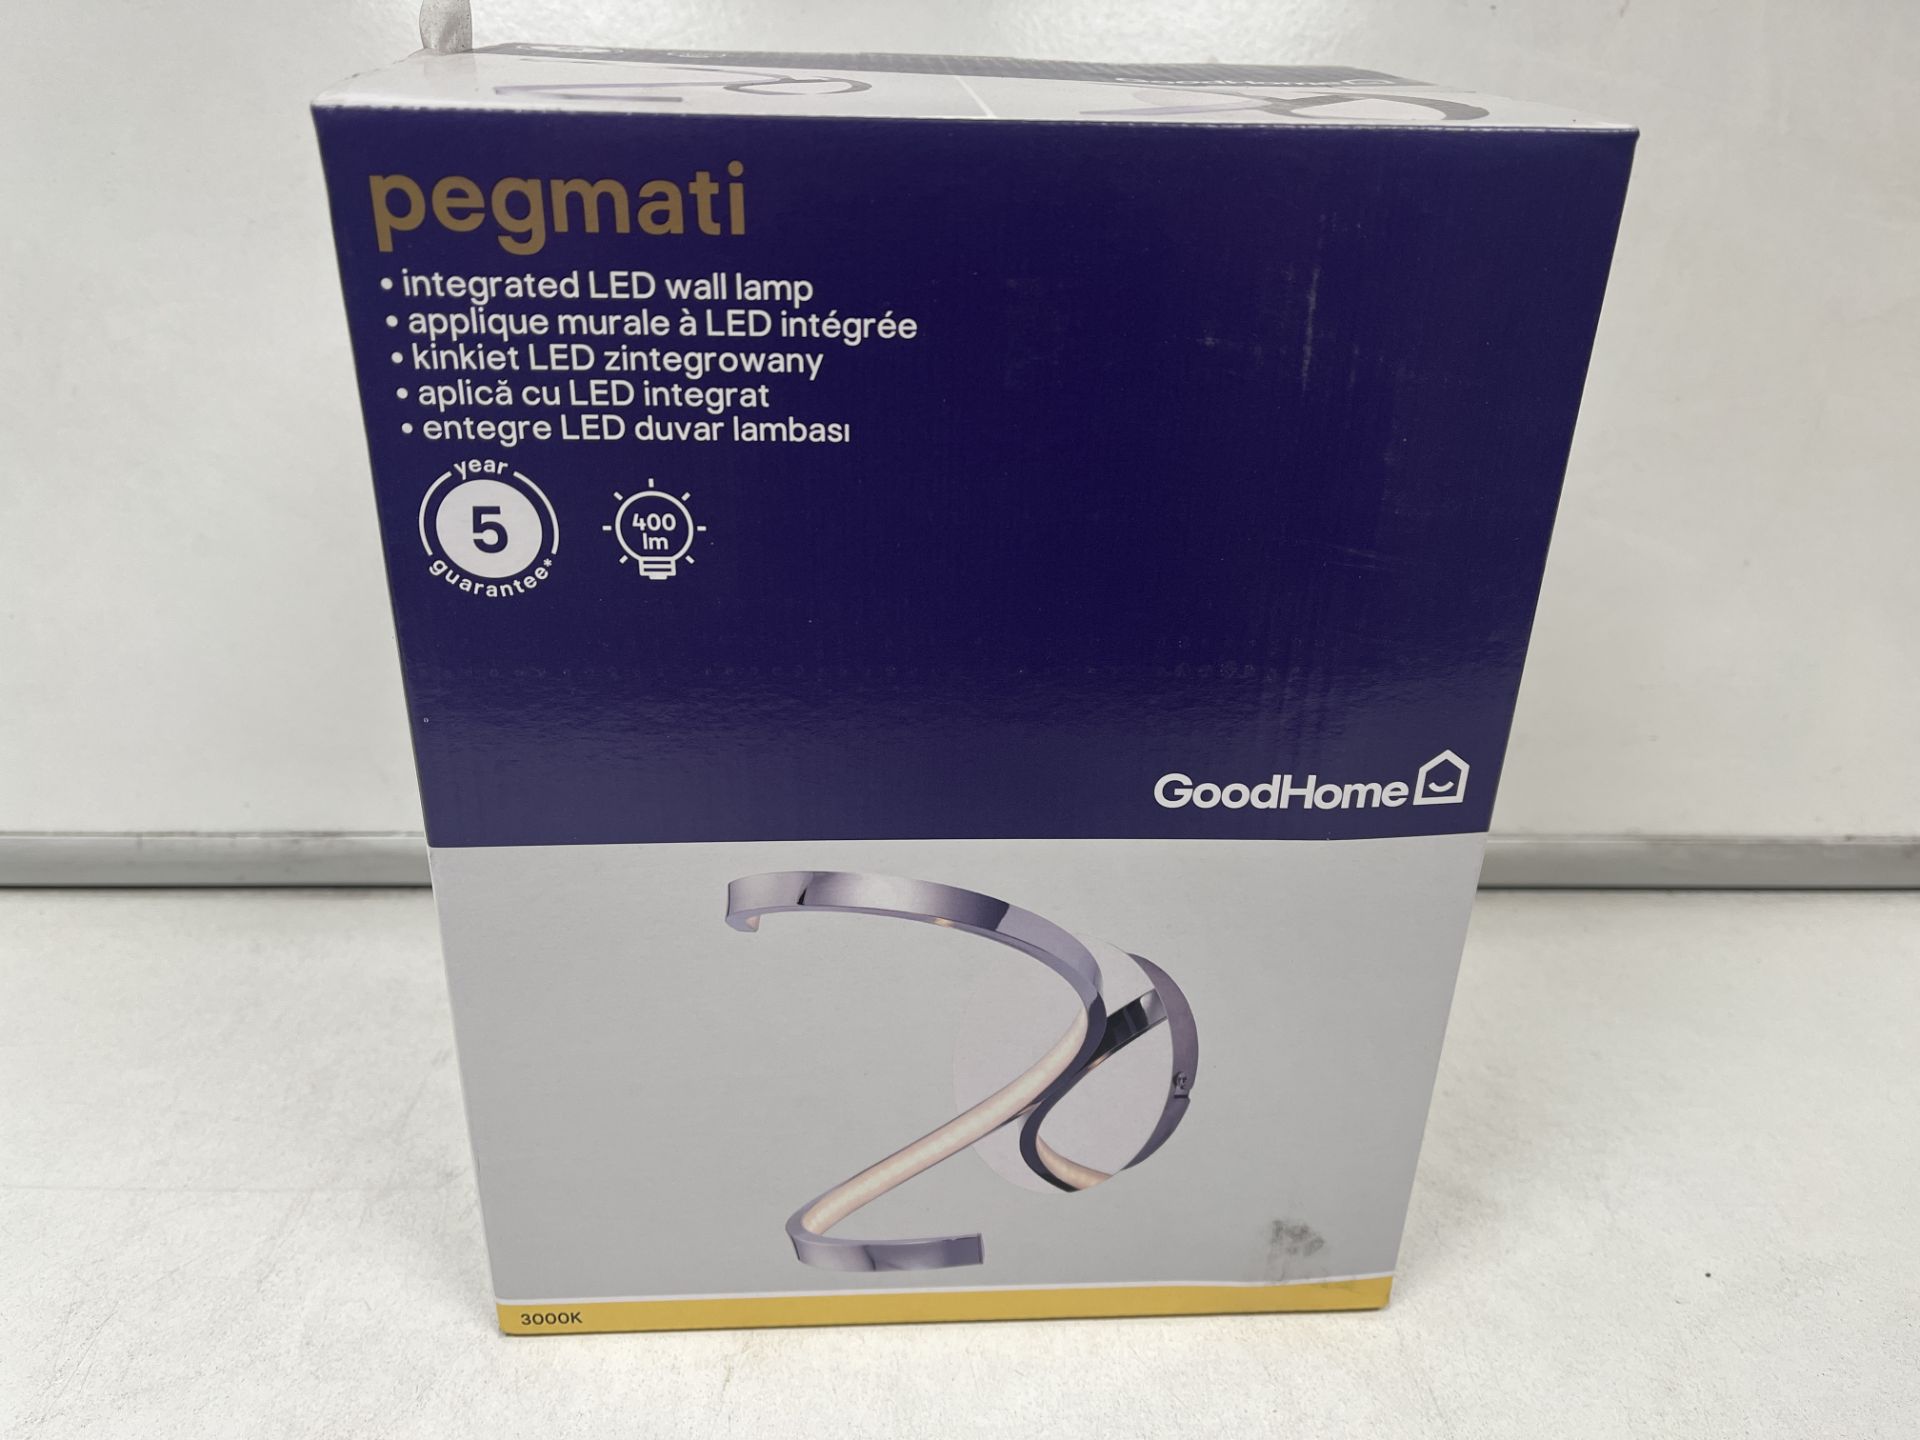 6 X NEW BOXED GOODHOME PEGMATI INTEGRATED LED WALL LAMPS. ROW12.4